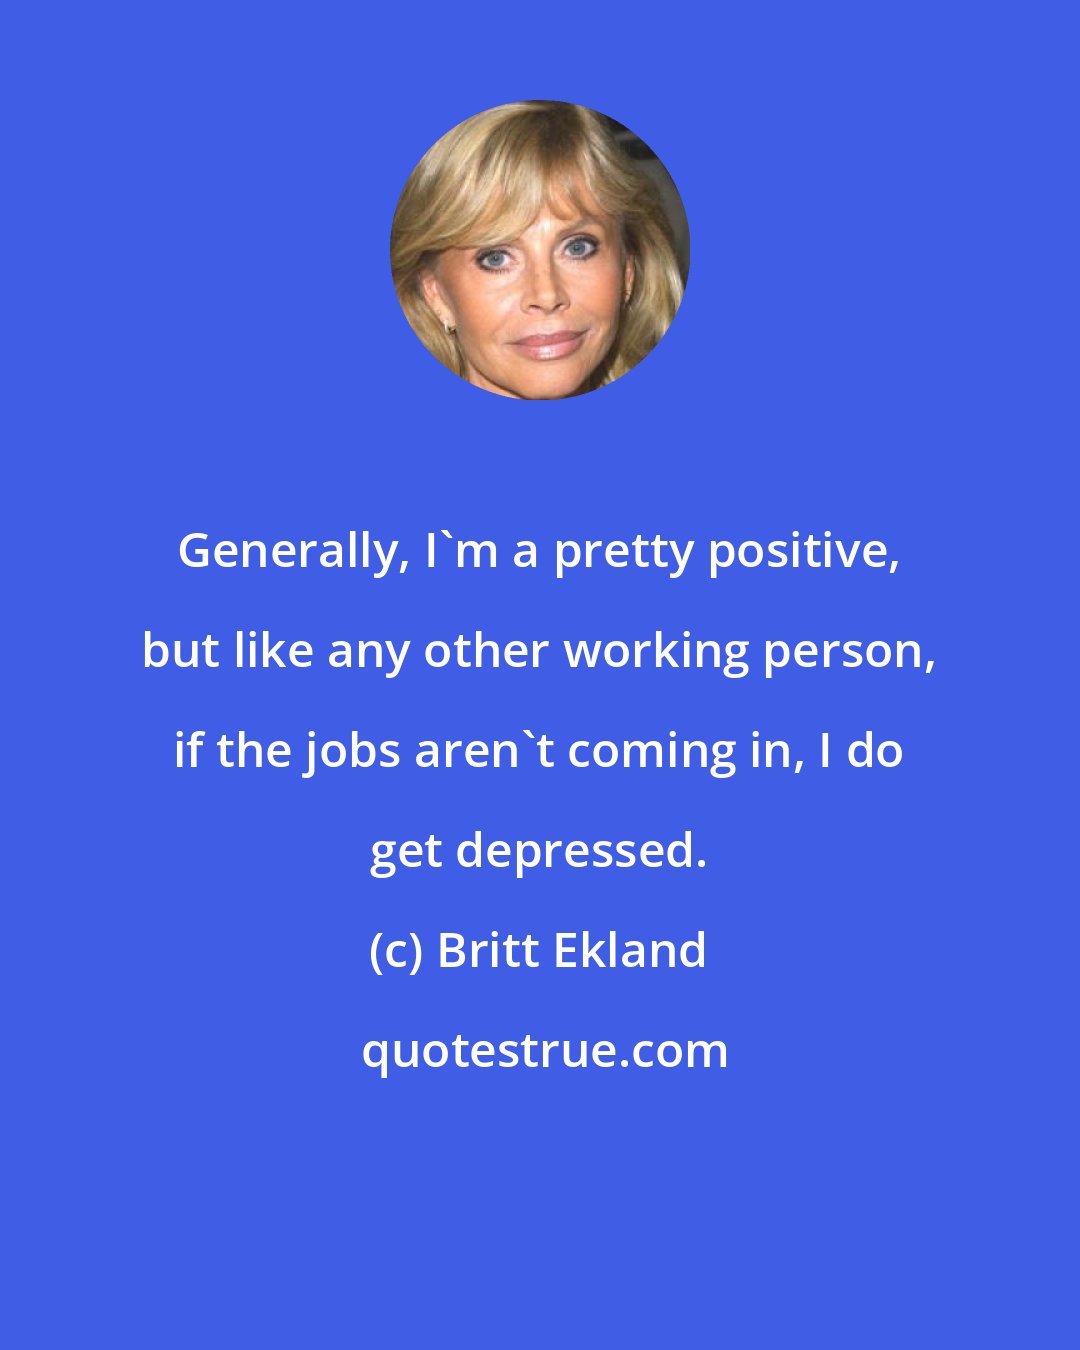 Britt Ekland: Generally, I'm a pretty positive, but like any other working person, if the jobs aren't coming in, I do get depressed.